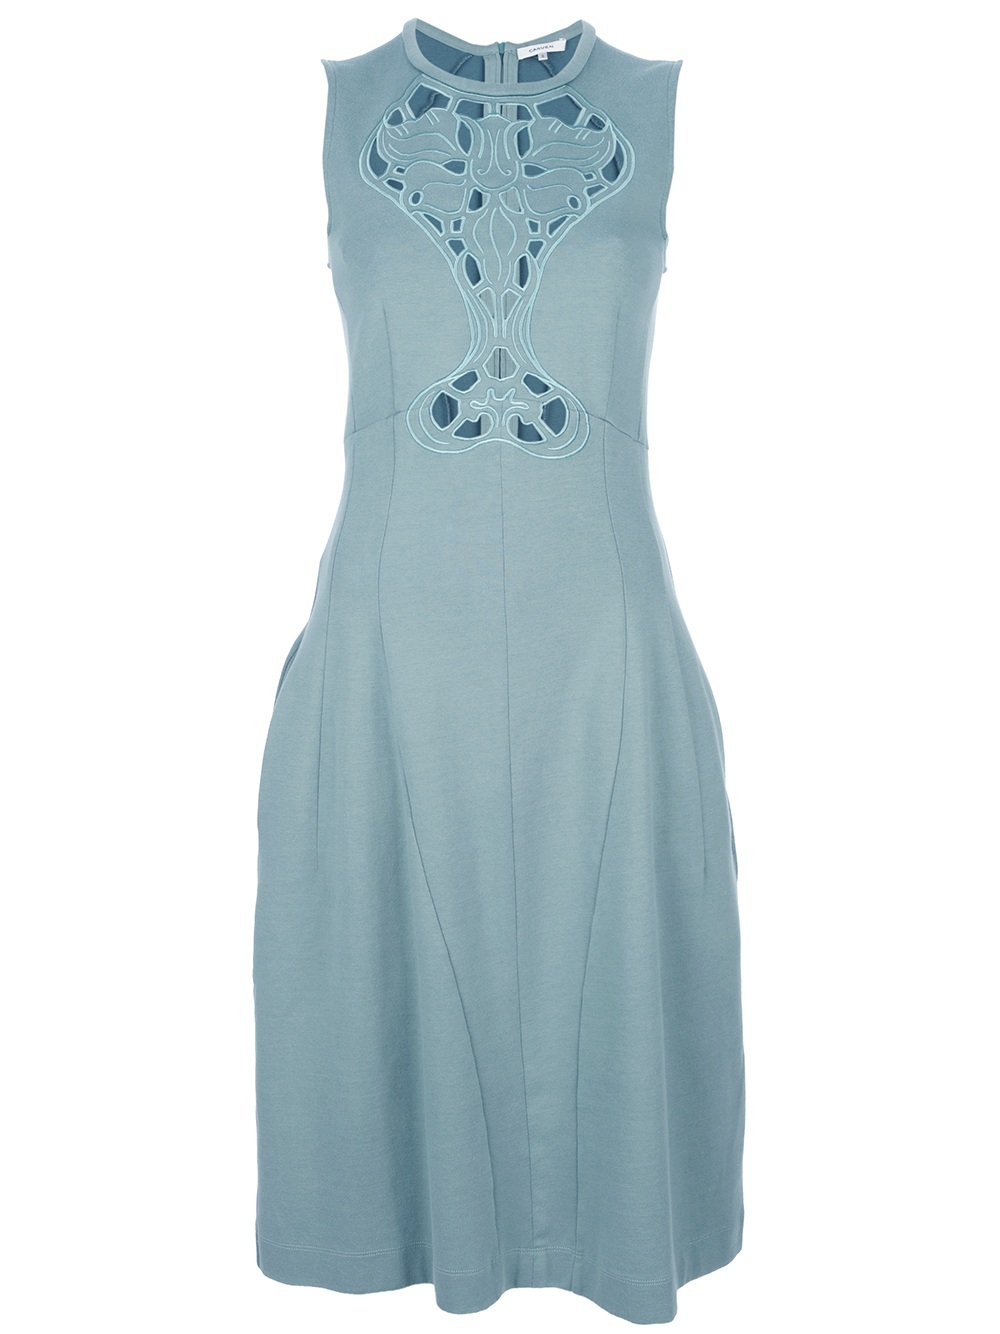 Lyst - Carven Cut-Out Embroidered Dress in Blue